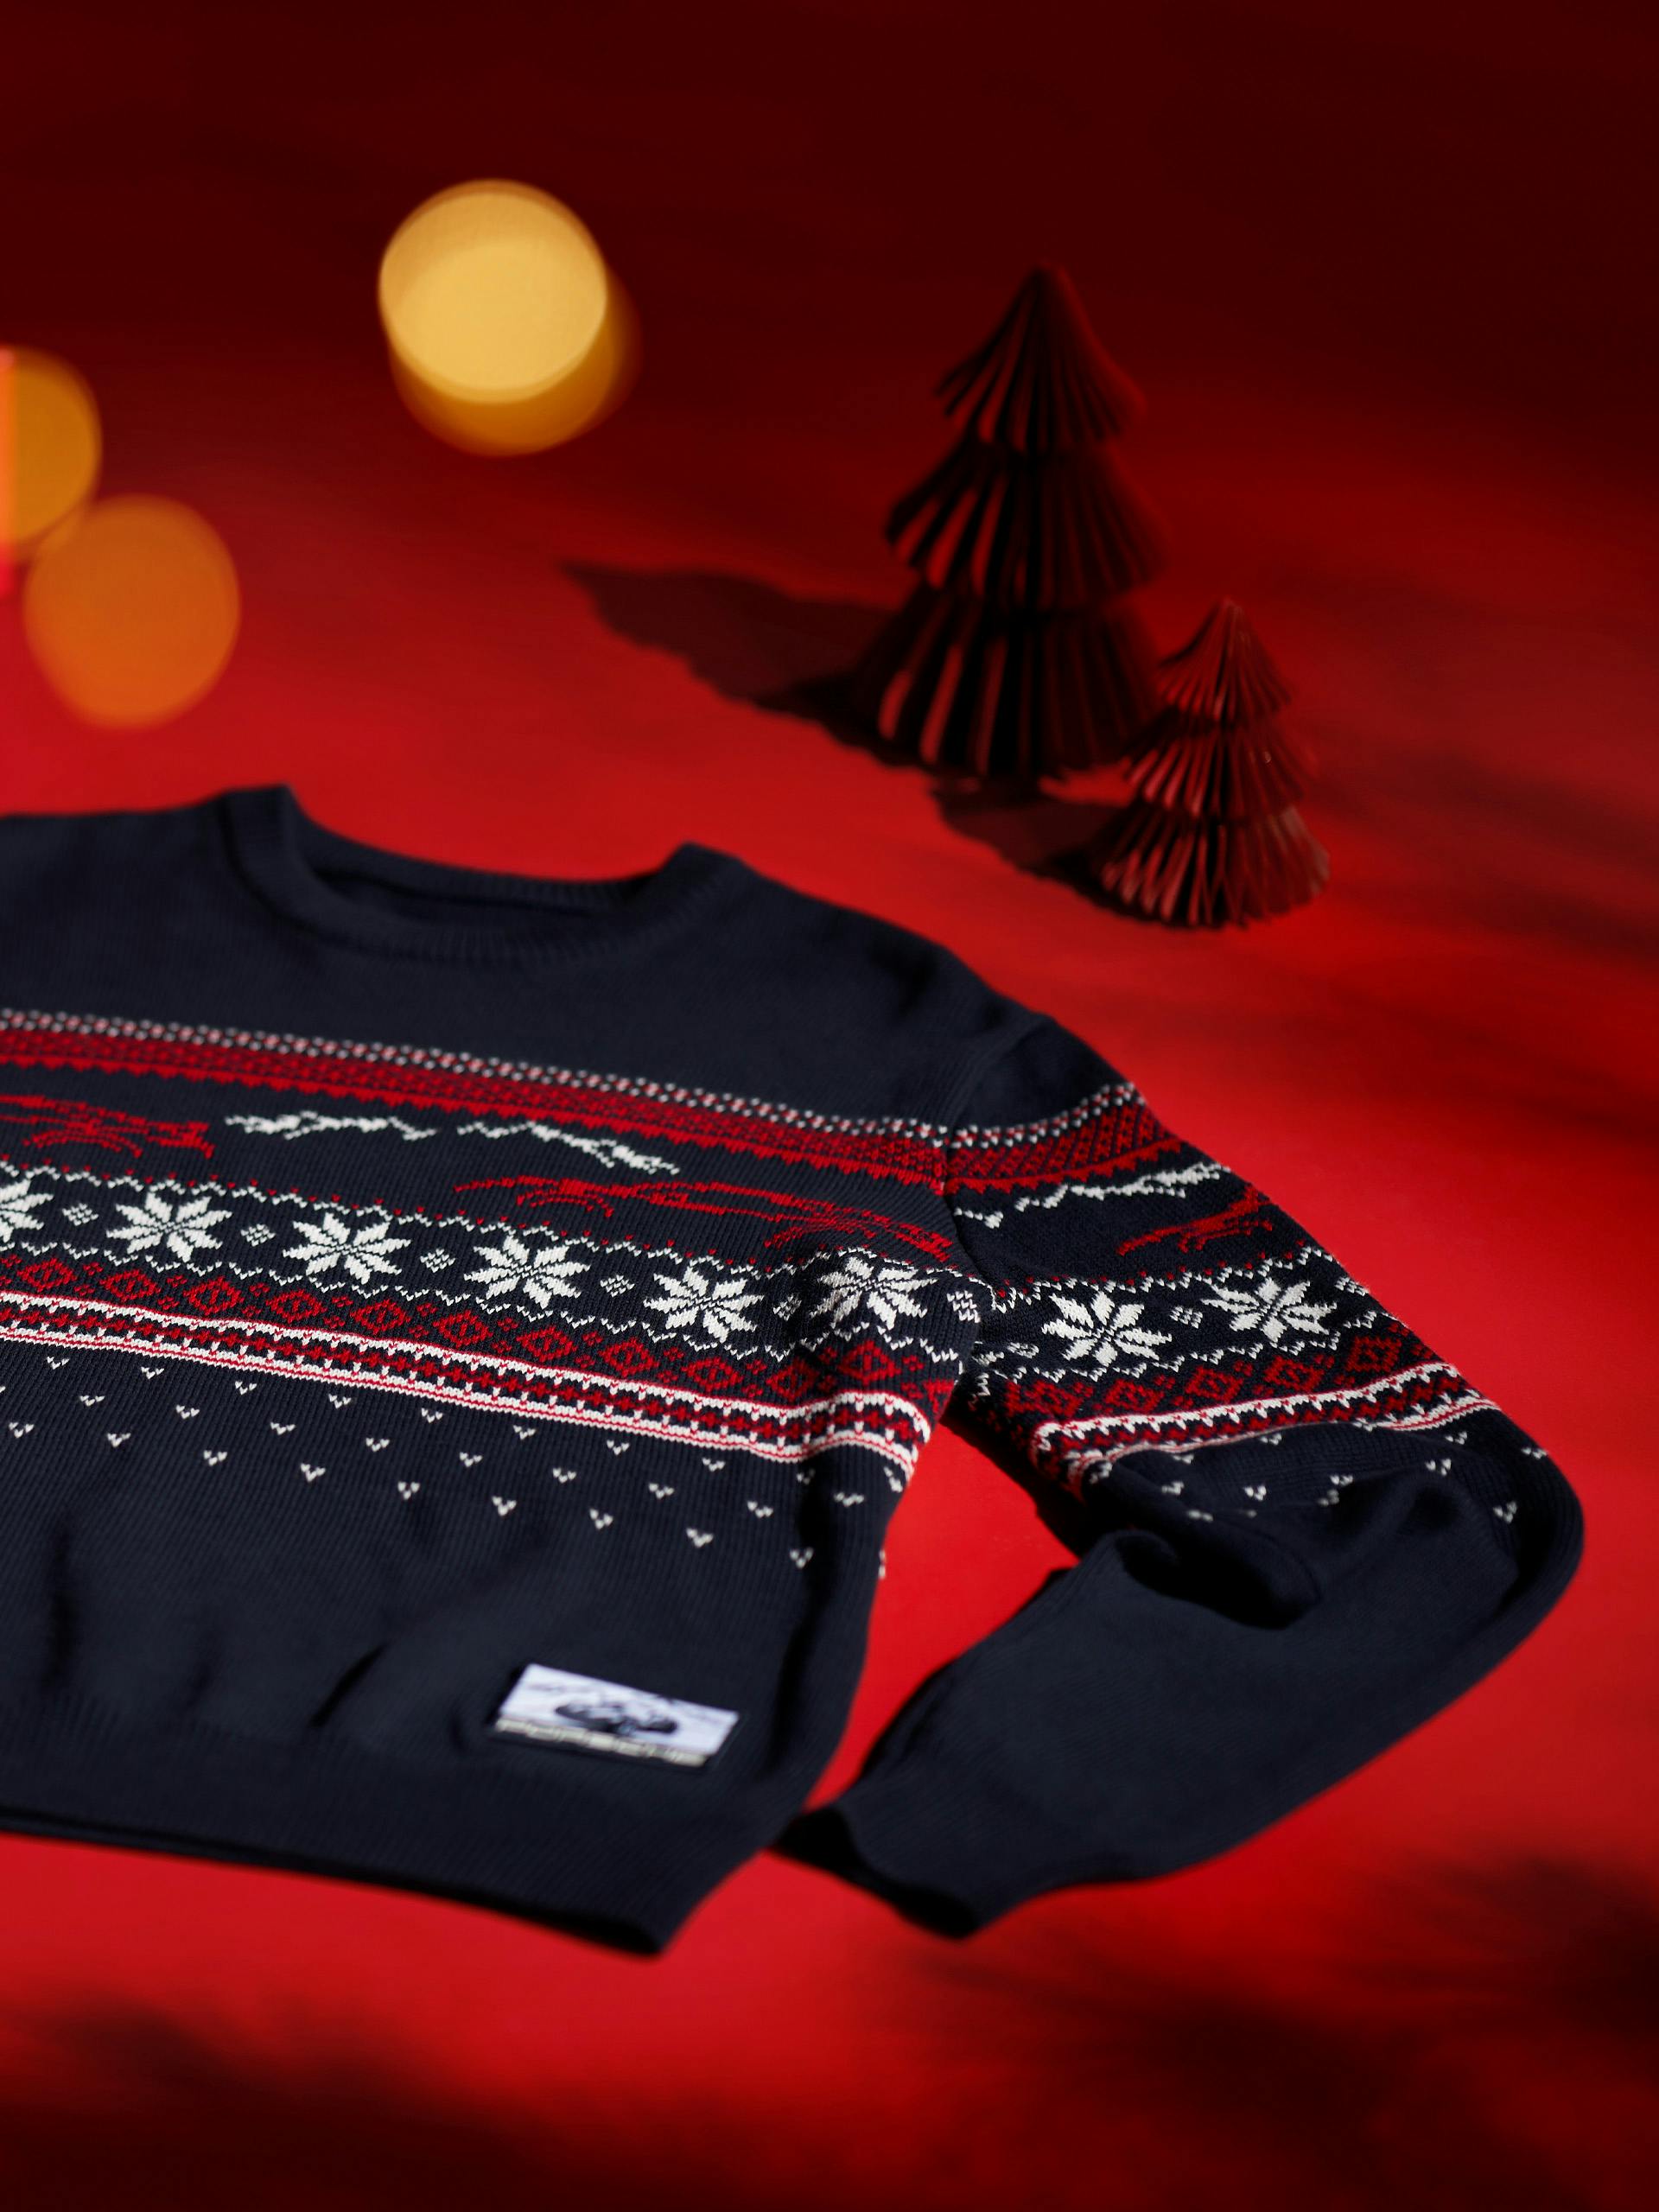 Porsche Christmas knitted pullover on a red background